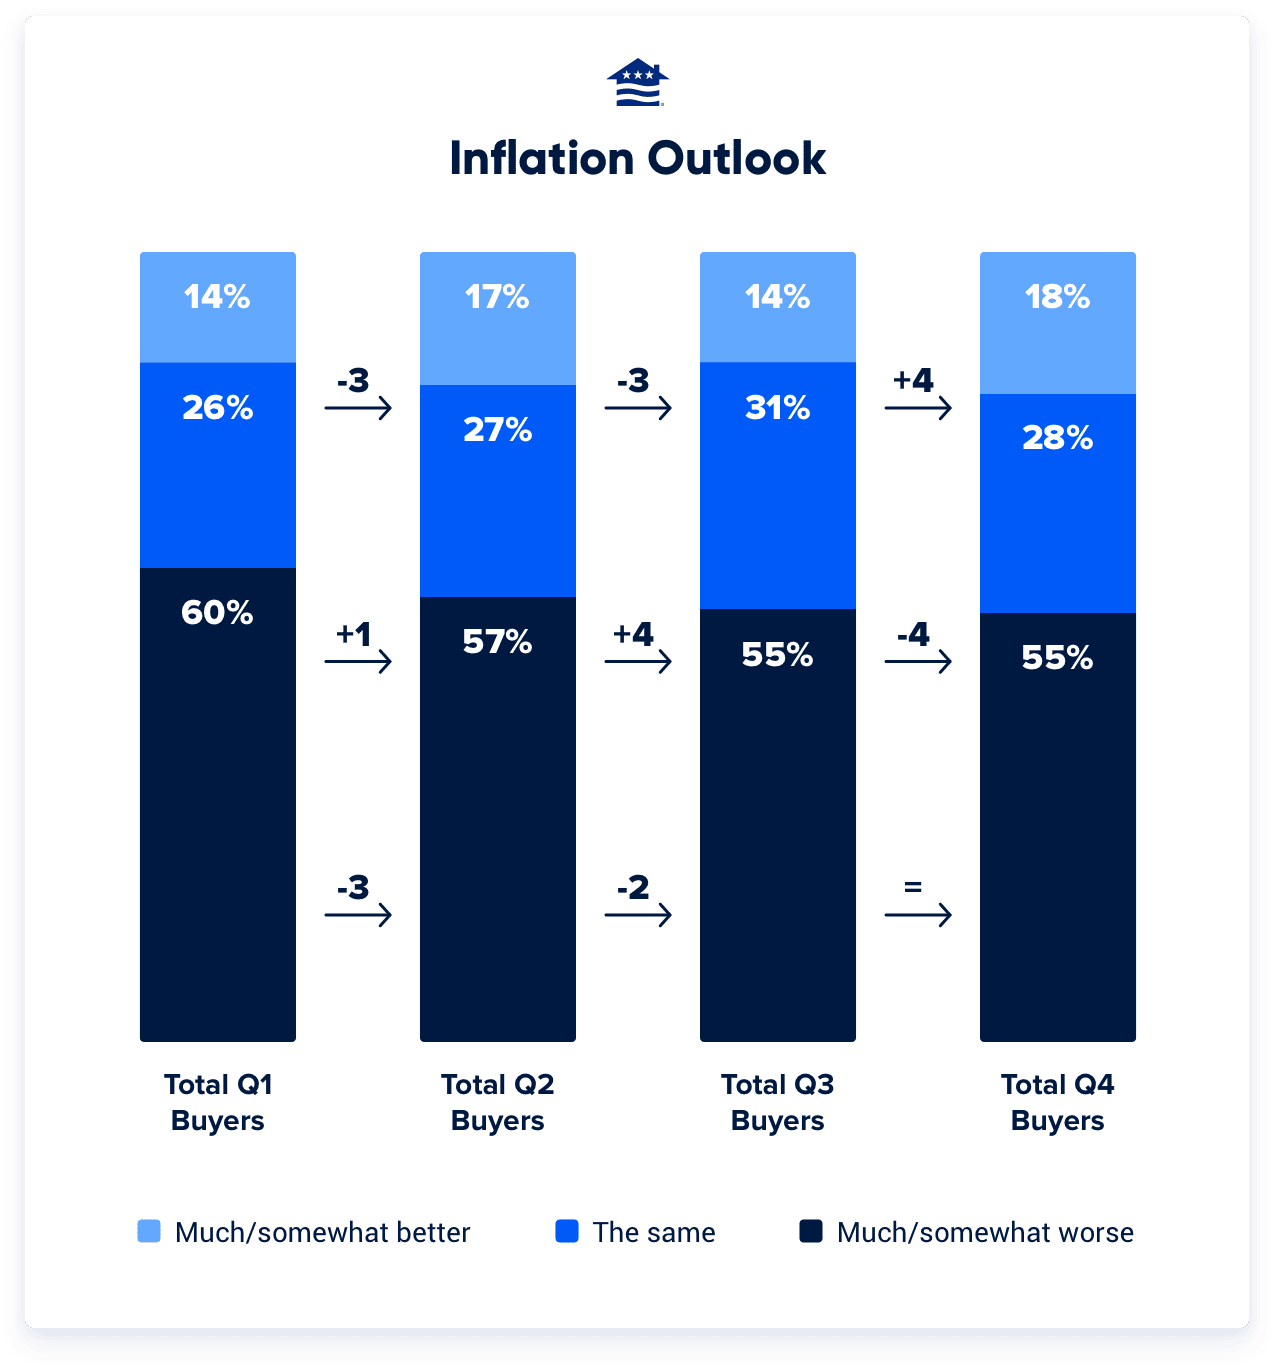 A growing minority of Veterans think inflation will be much or somewhat lower over the next year (18% in Q4 compared to 14% in Q4), most Veterans (55%) still expect inflation to rise over the next 12 months.